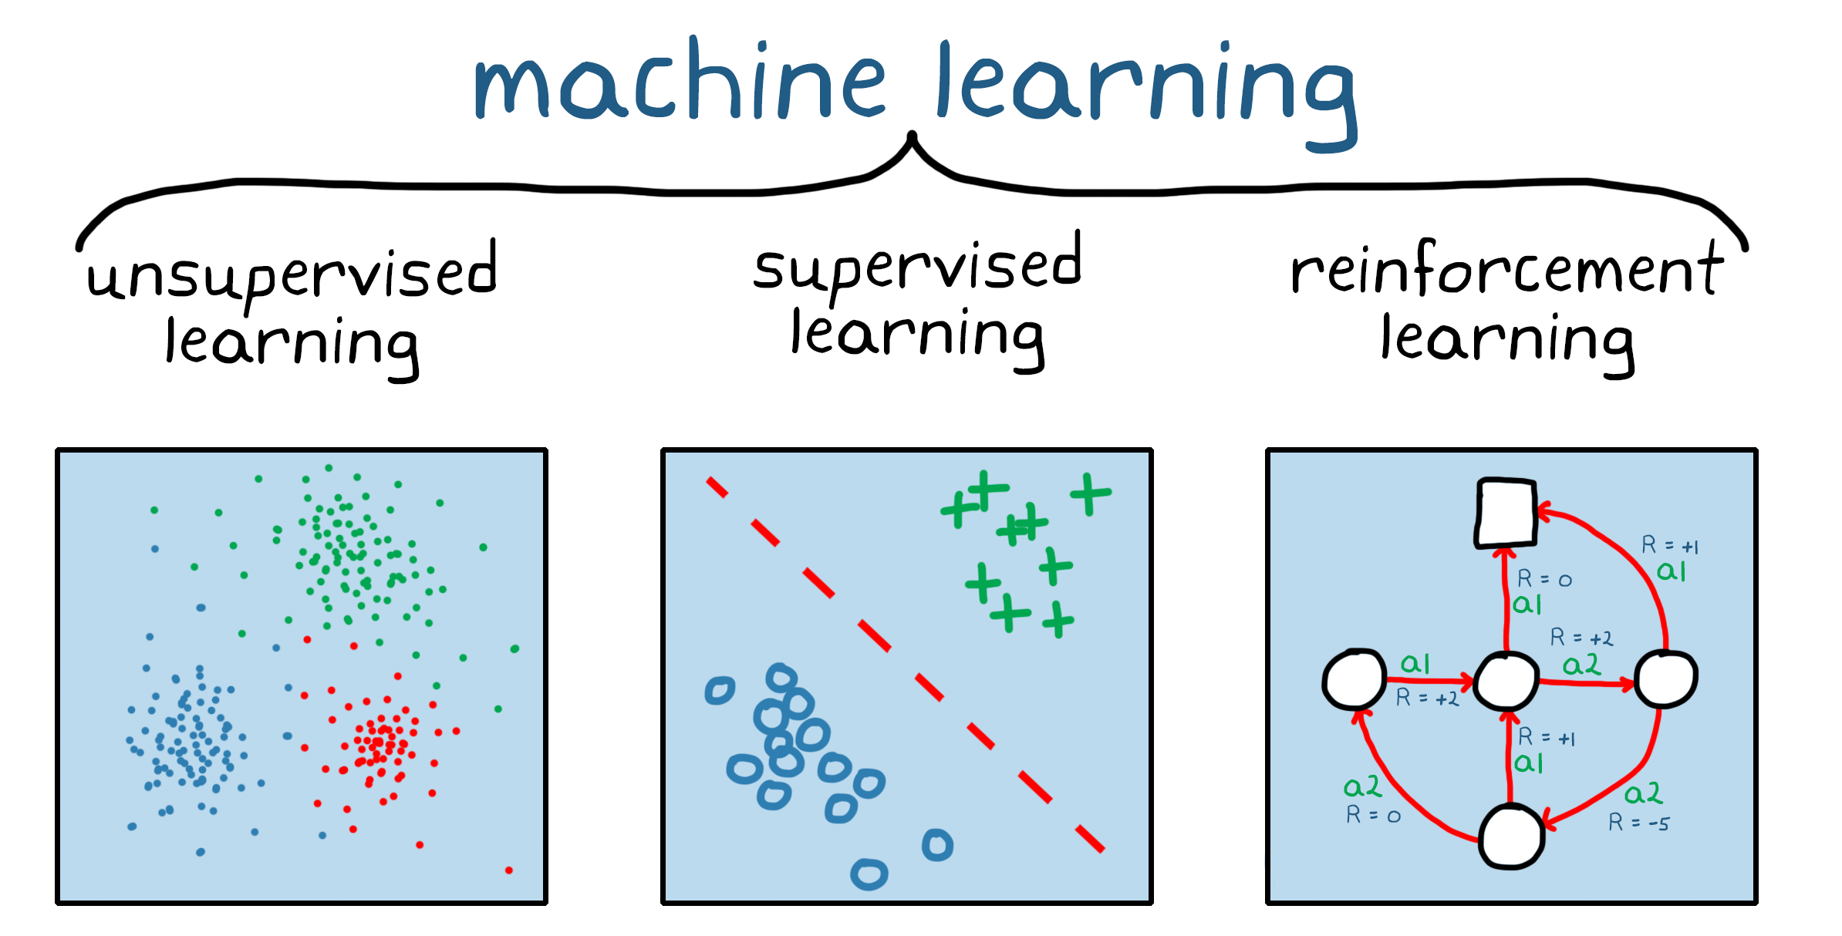 Three broad categories of machine learning: unsupervised learning, supervised learning, and reinforcement learning.